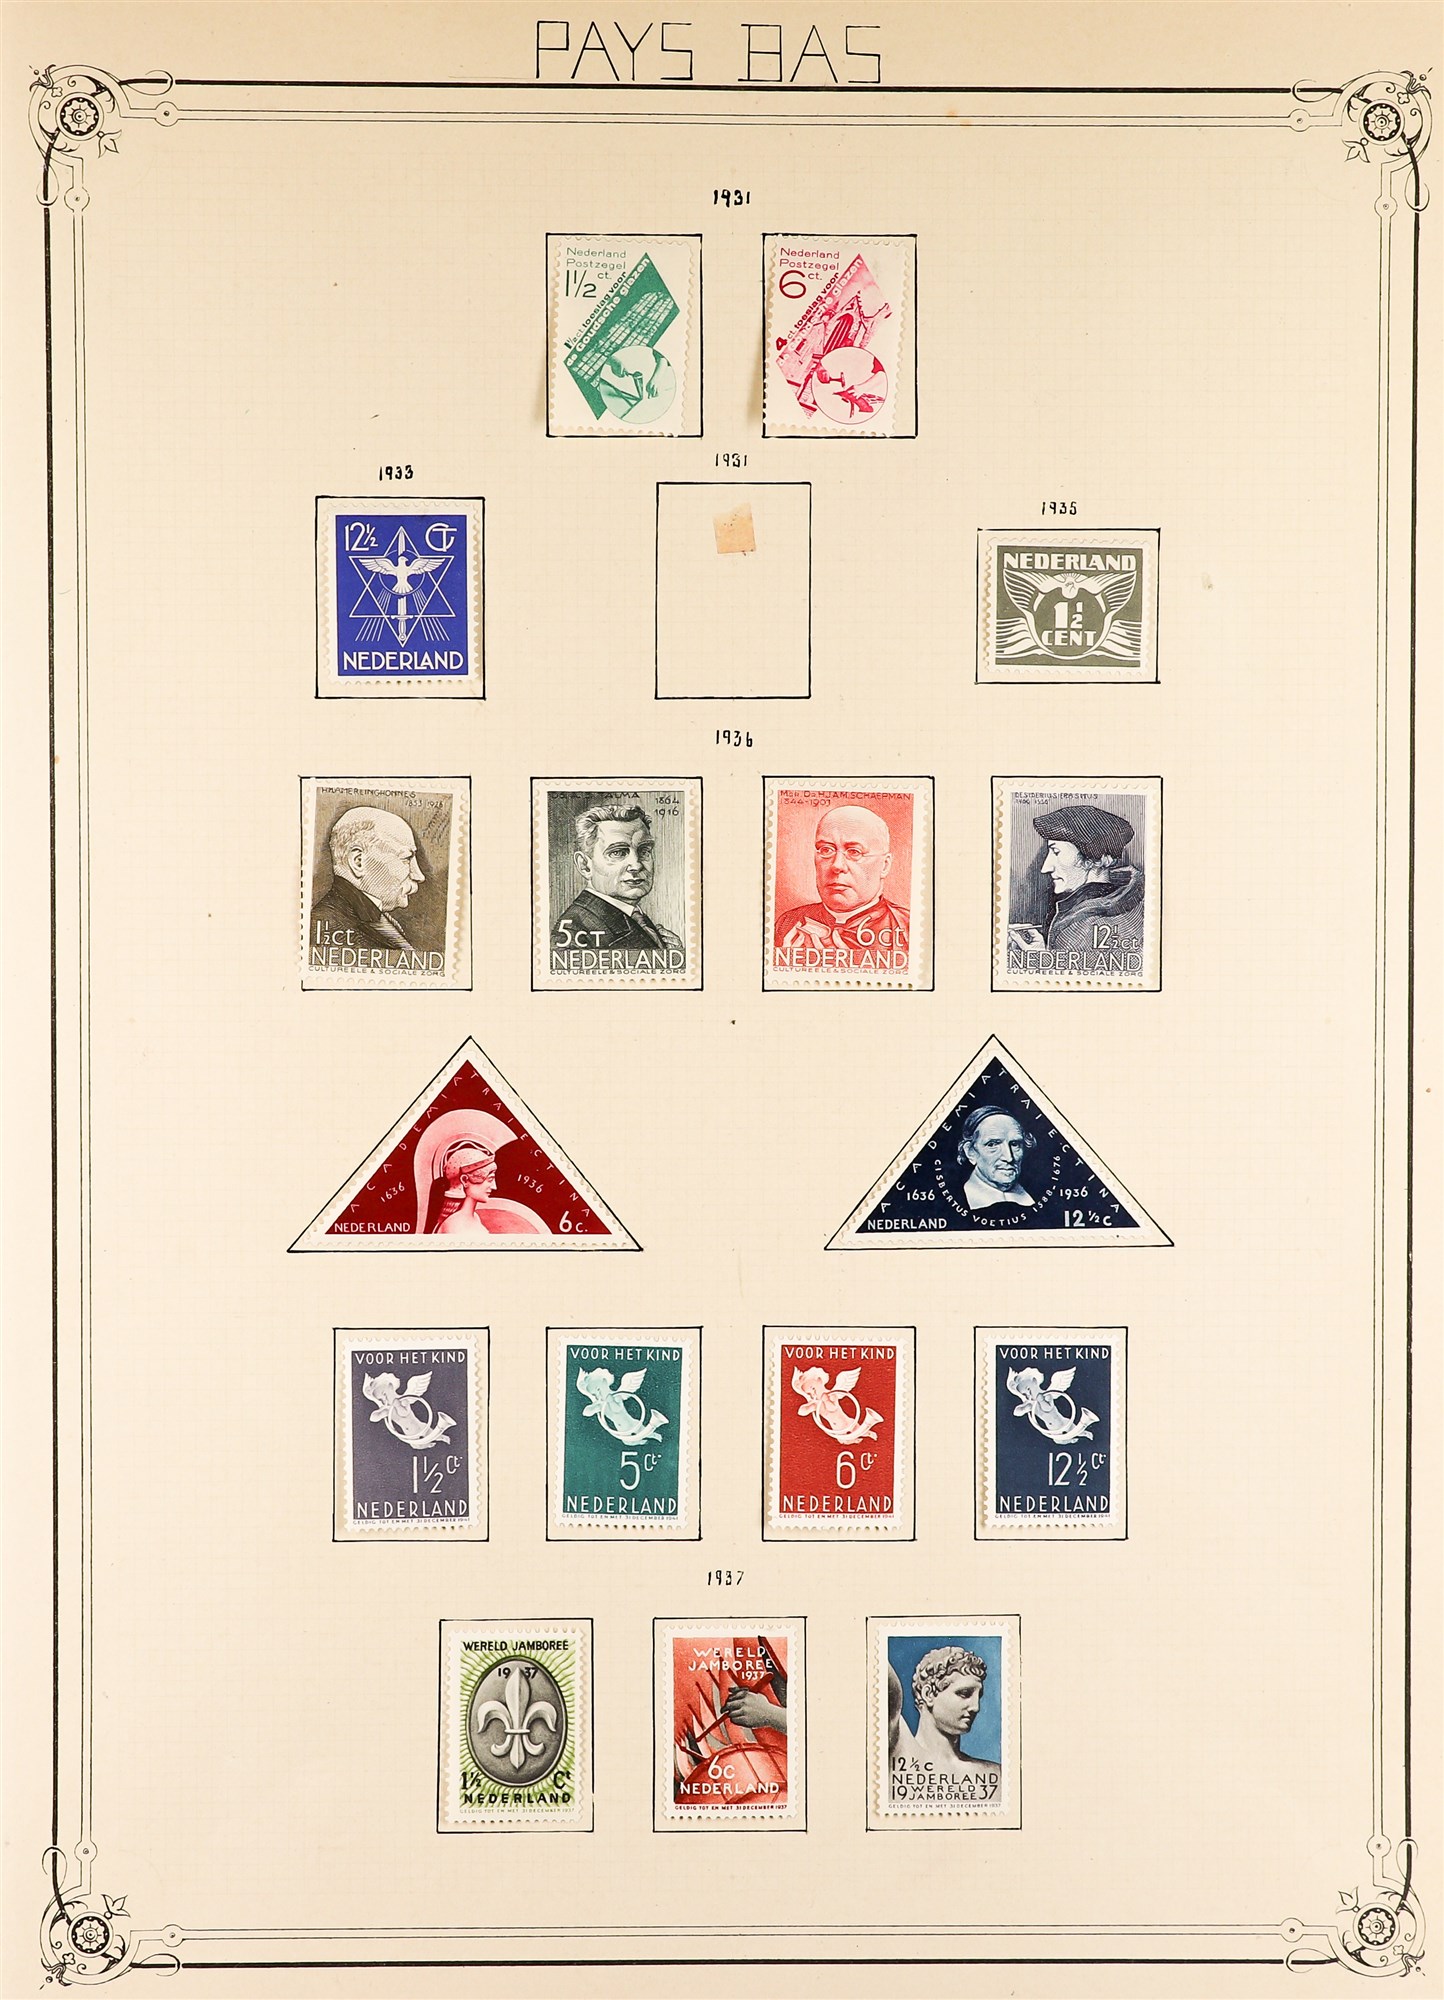 NETHERLANDS 1921 - 1939 MINT SETS collection on album pages, Michel €3000+ (110+ stamps) - Image 4 of 6